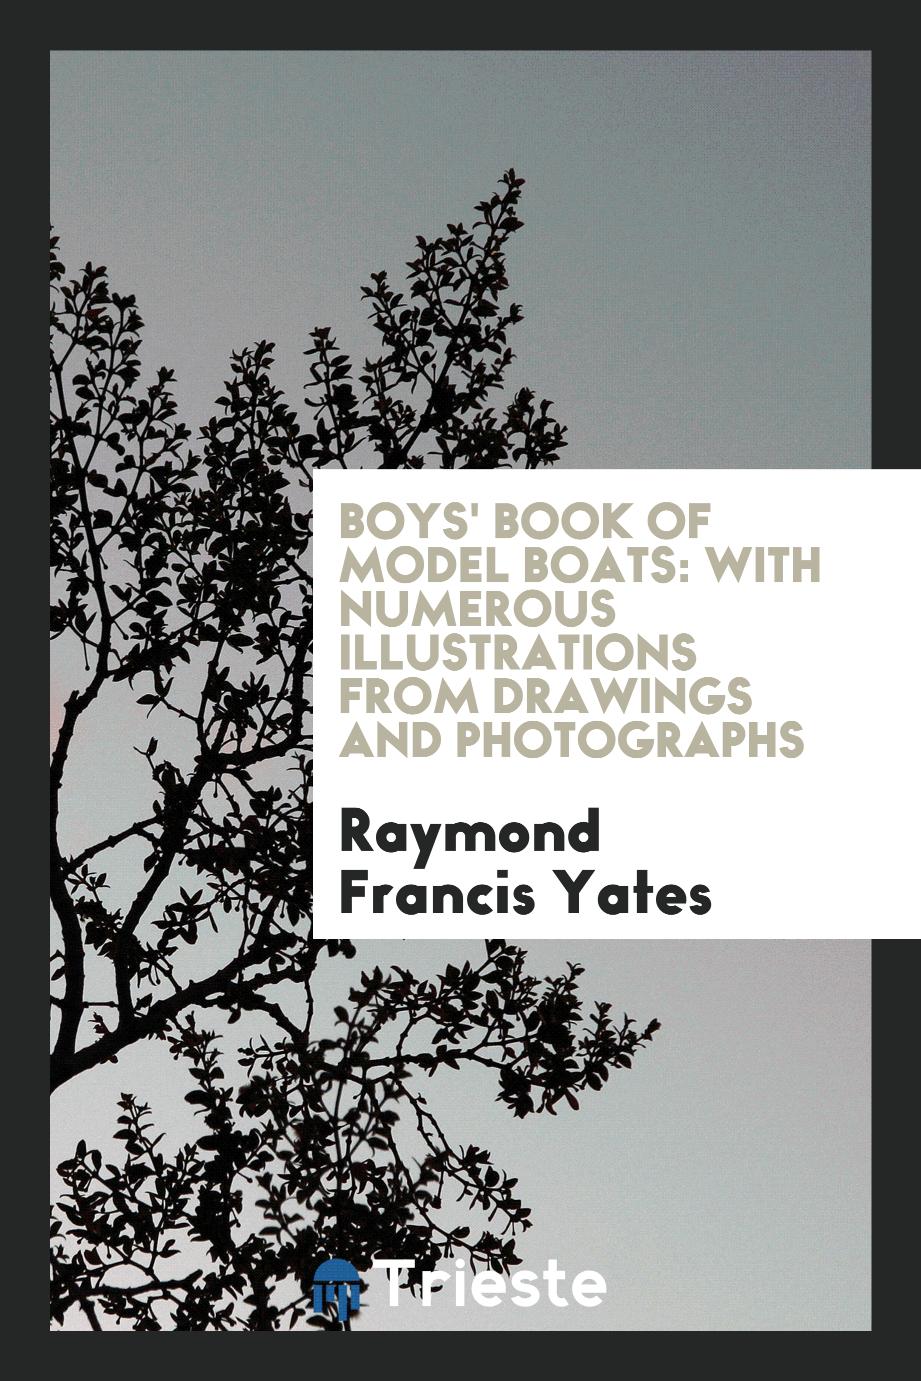 Boys' book of model boats: with numerous illustrations from drawings and photographs